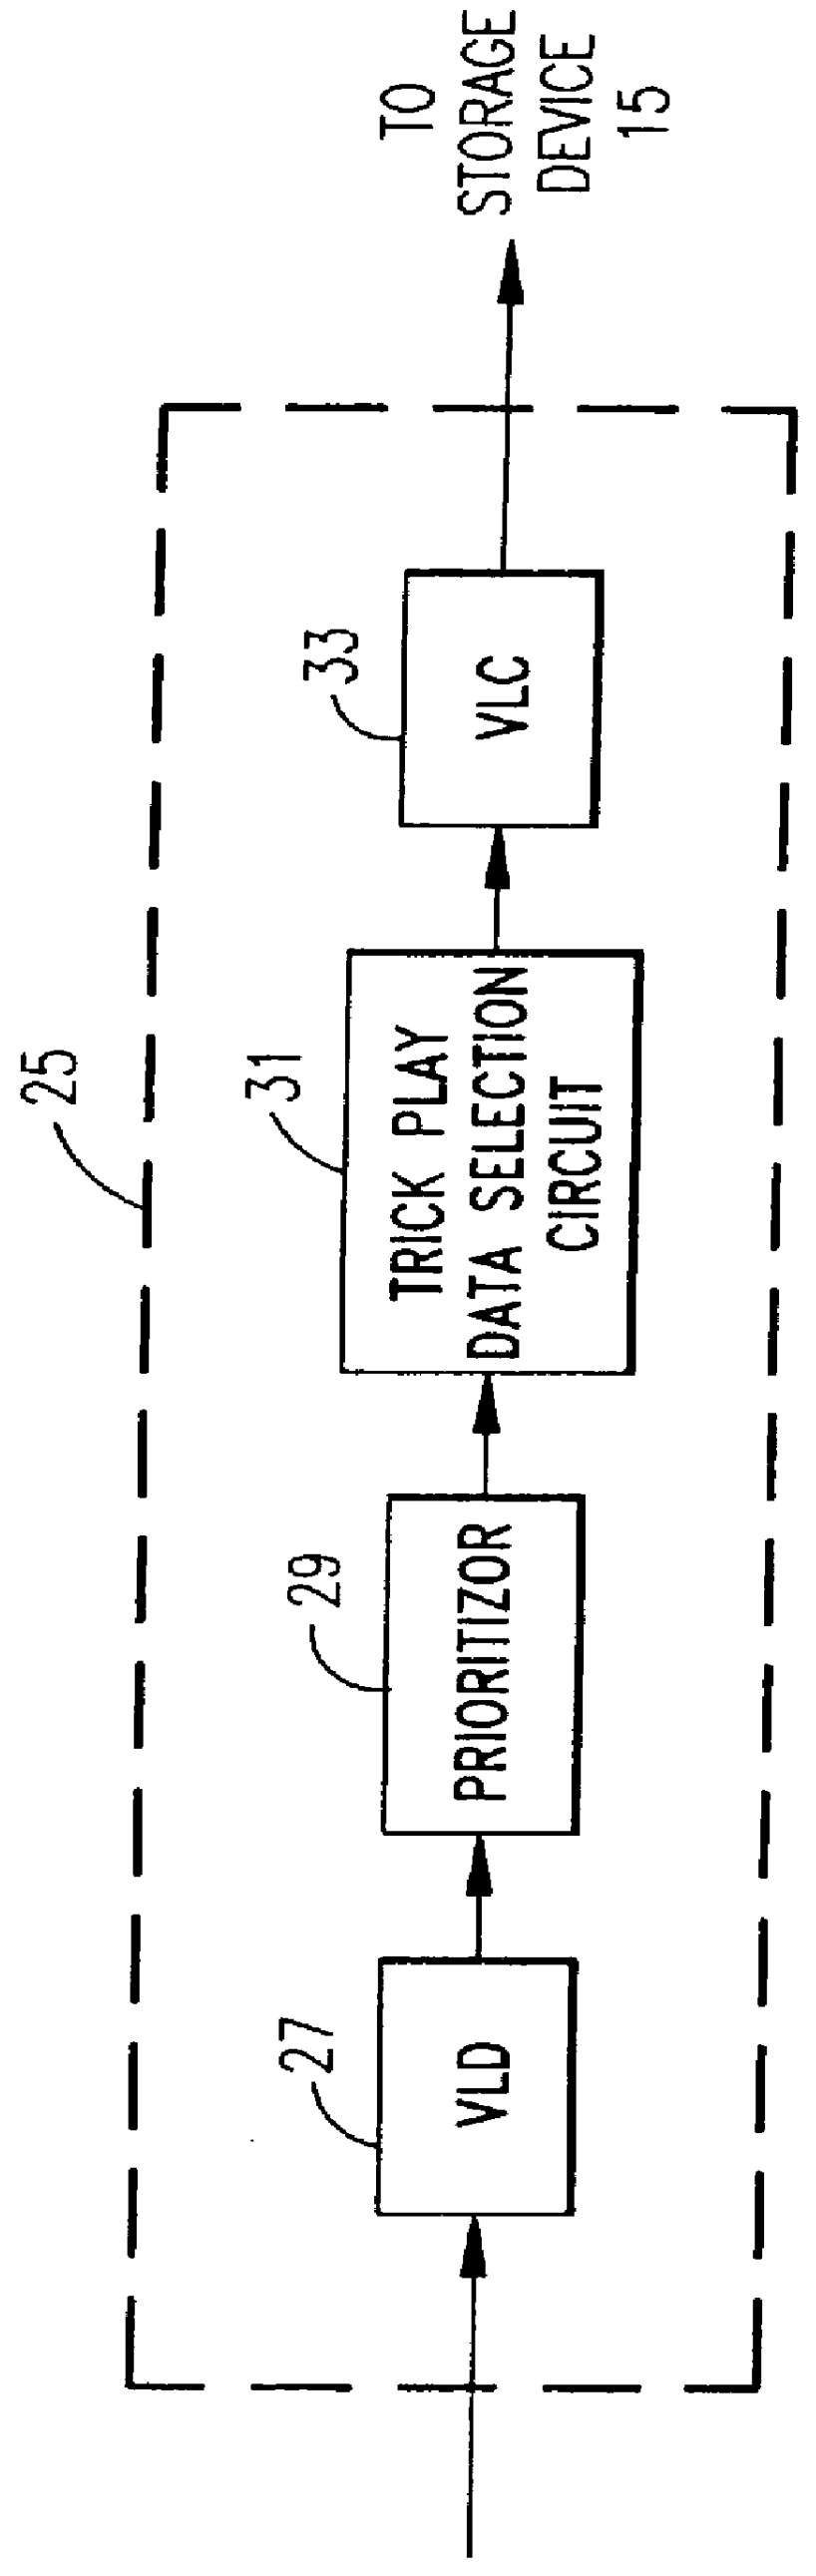 Method and apparatus for achieving video data reduction through the use of re-encoding